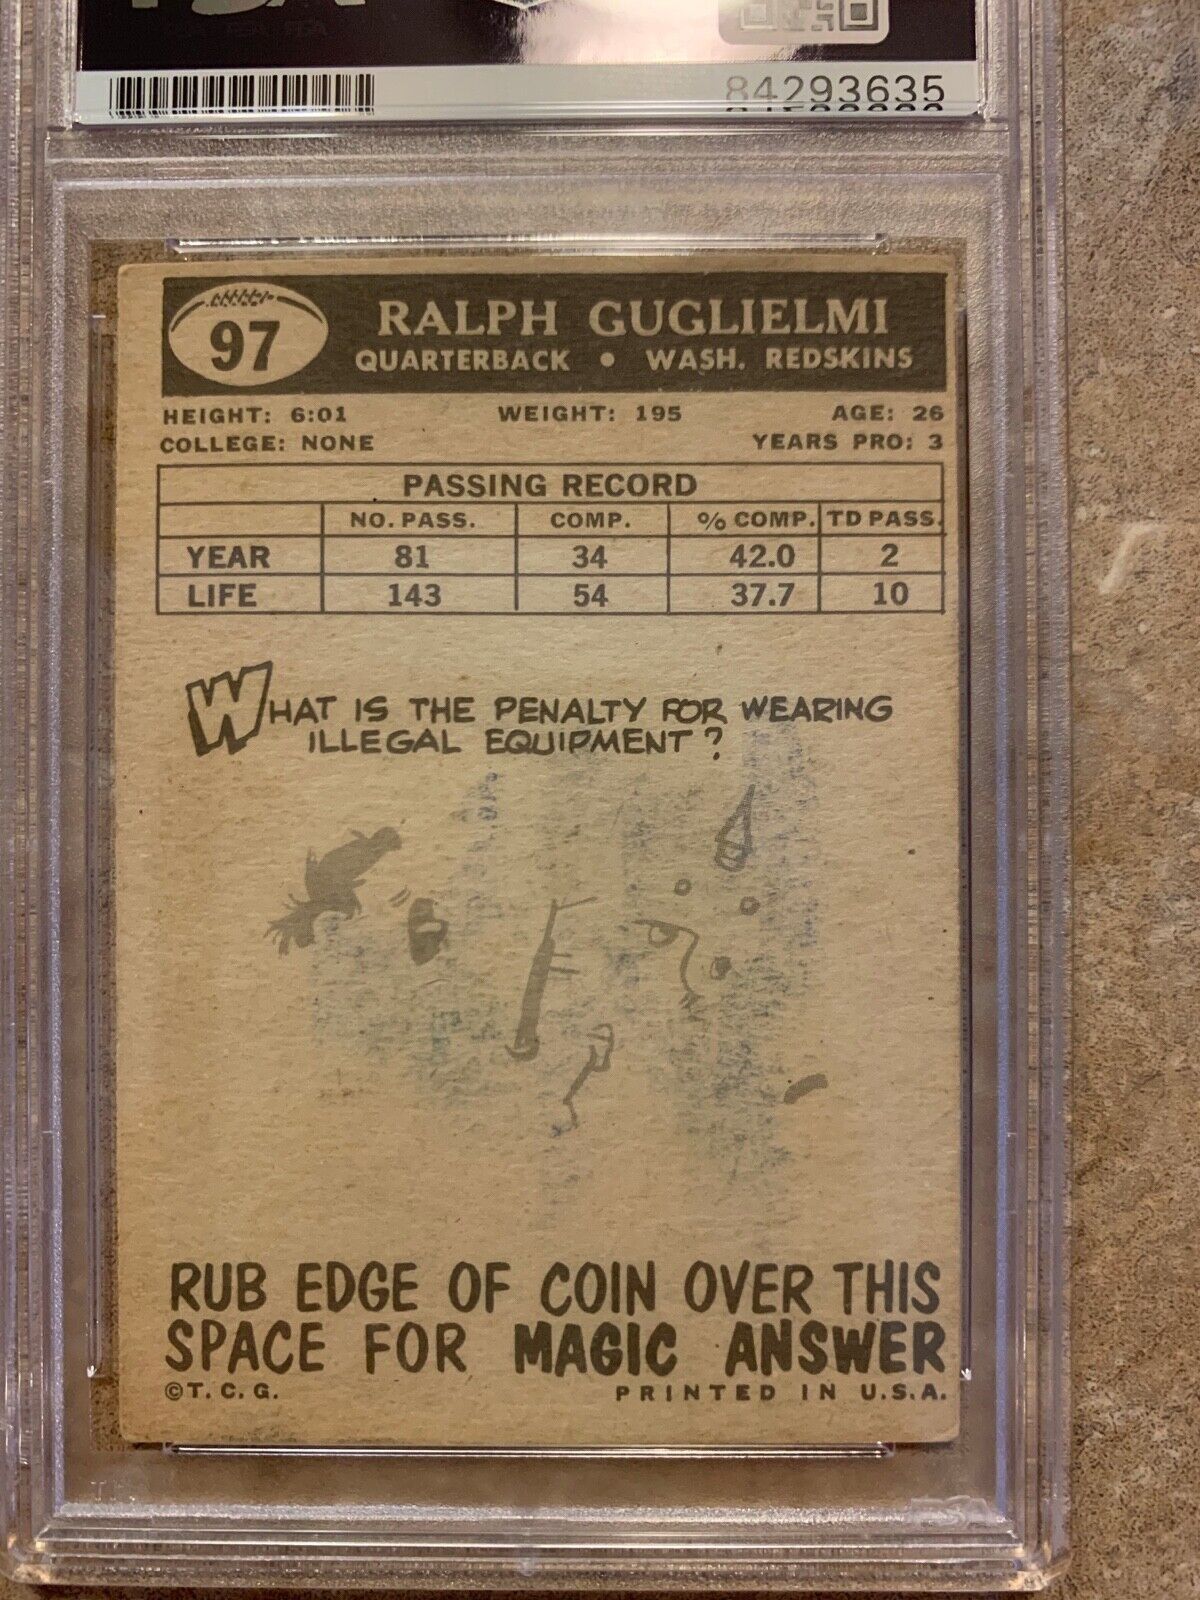 Ralph Gugliemi Redskins Autographed 1959 Topps Card PSA Certified & Slabbed